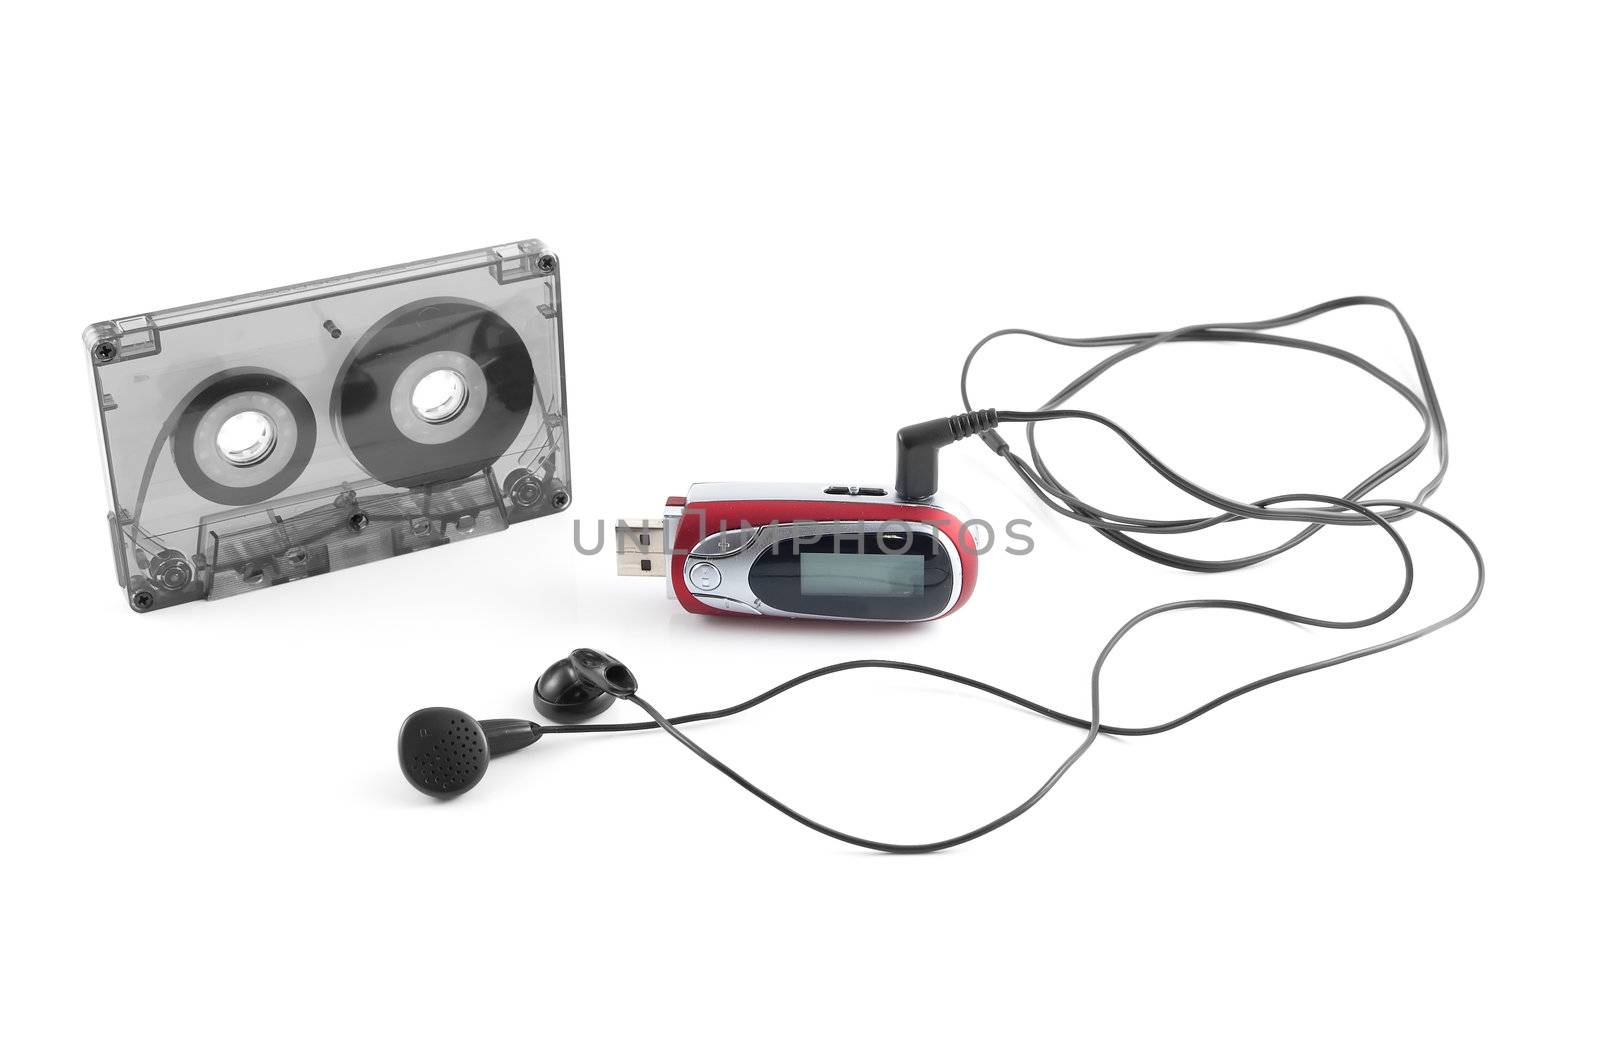 Audiocassette and mp3 player by grekoff